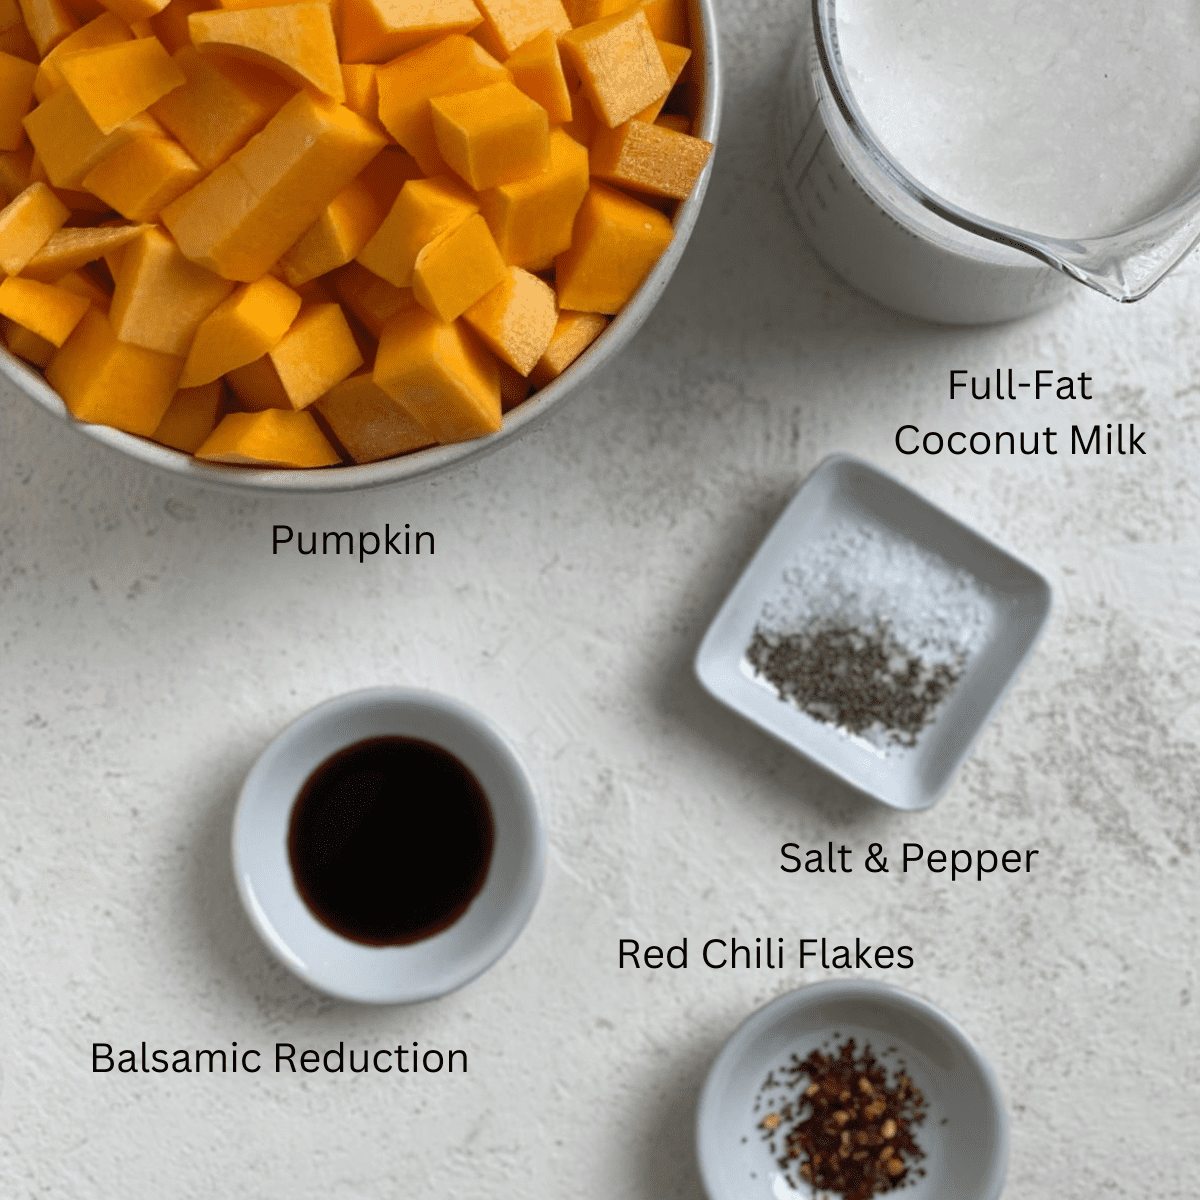 ingredients for Easy Vegan Pumpkin Soup measured out against a white surface